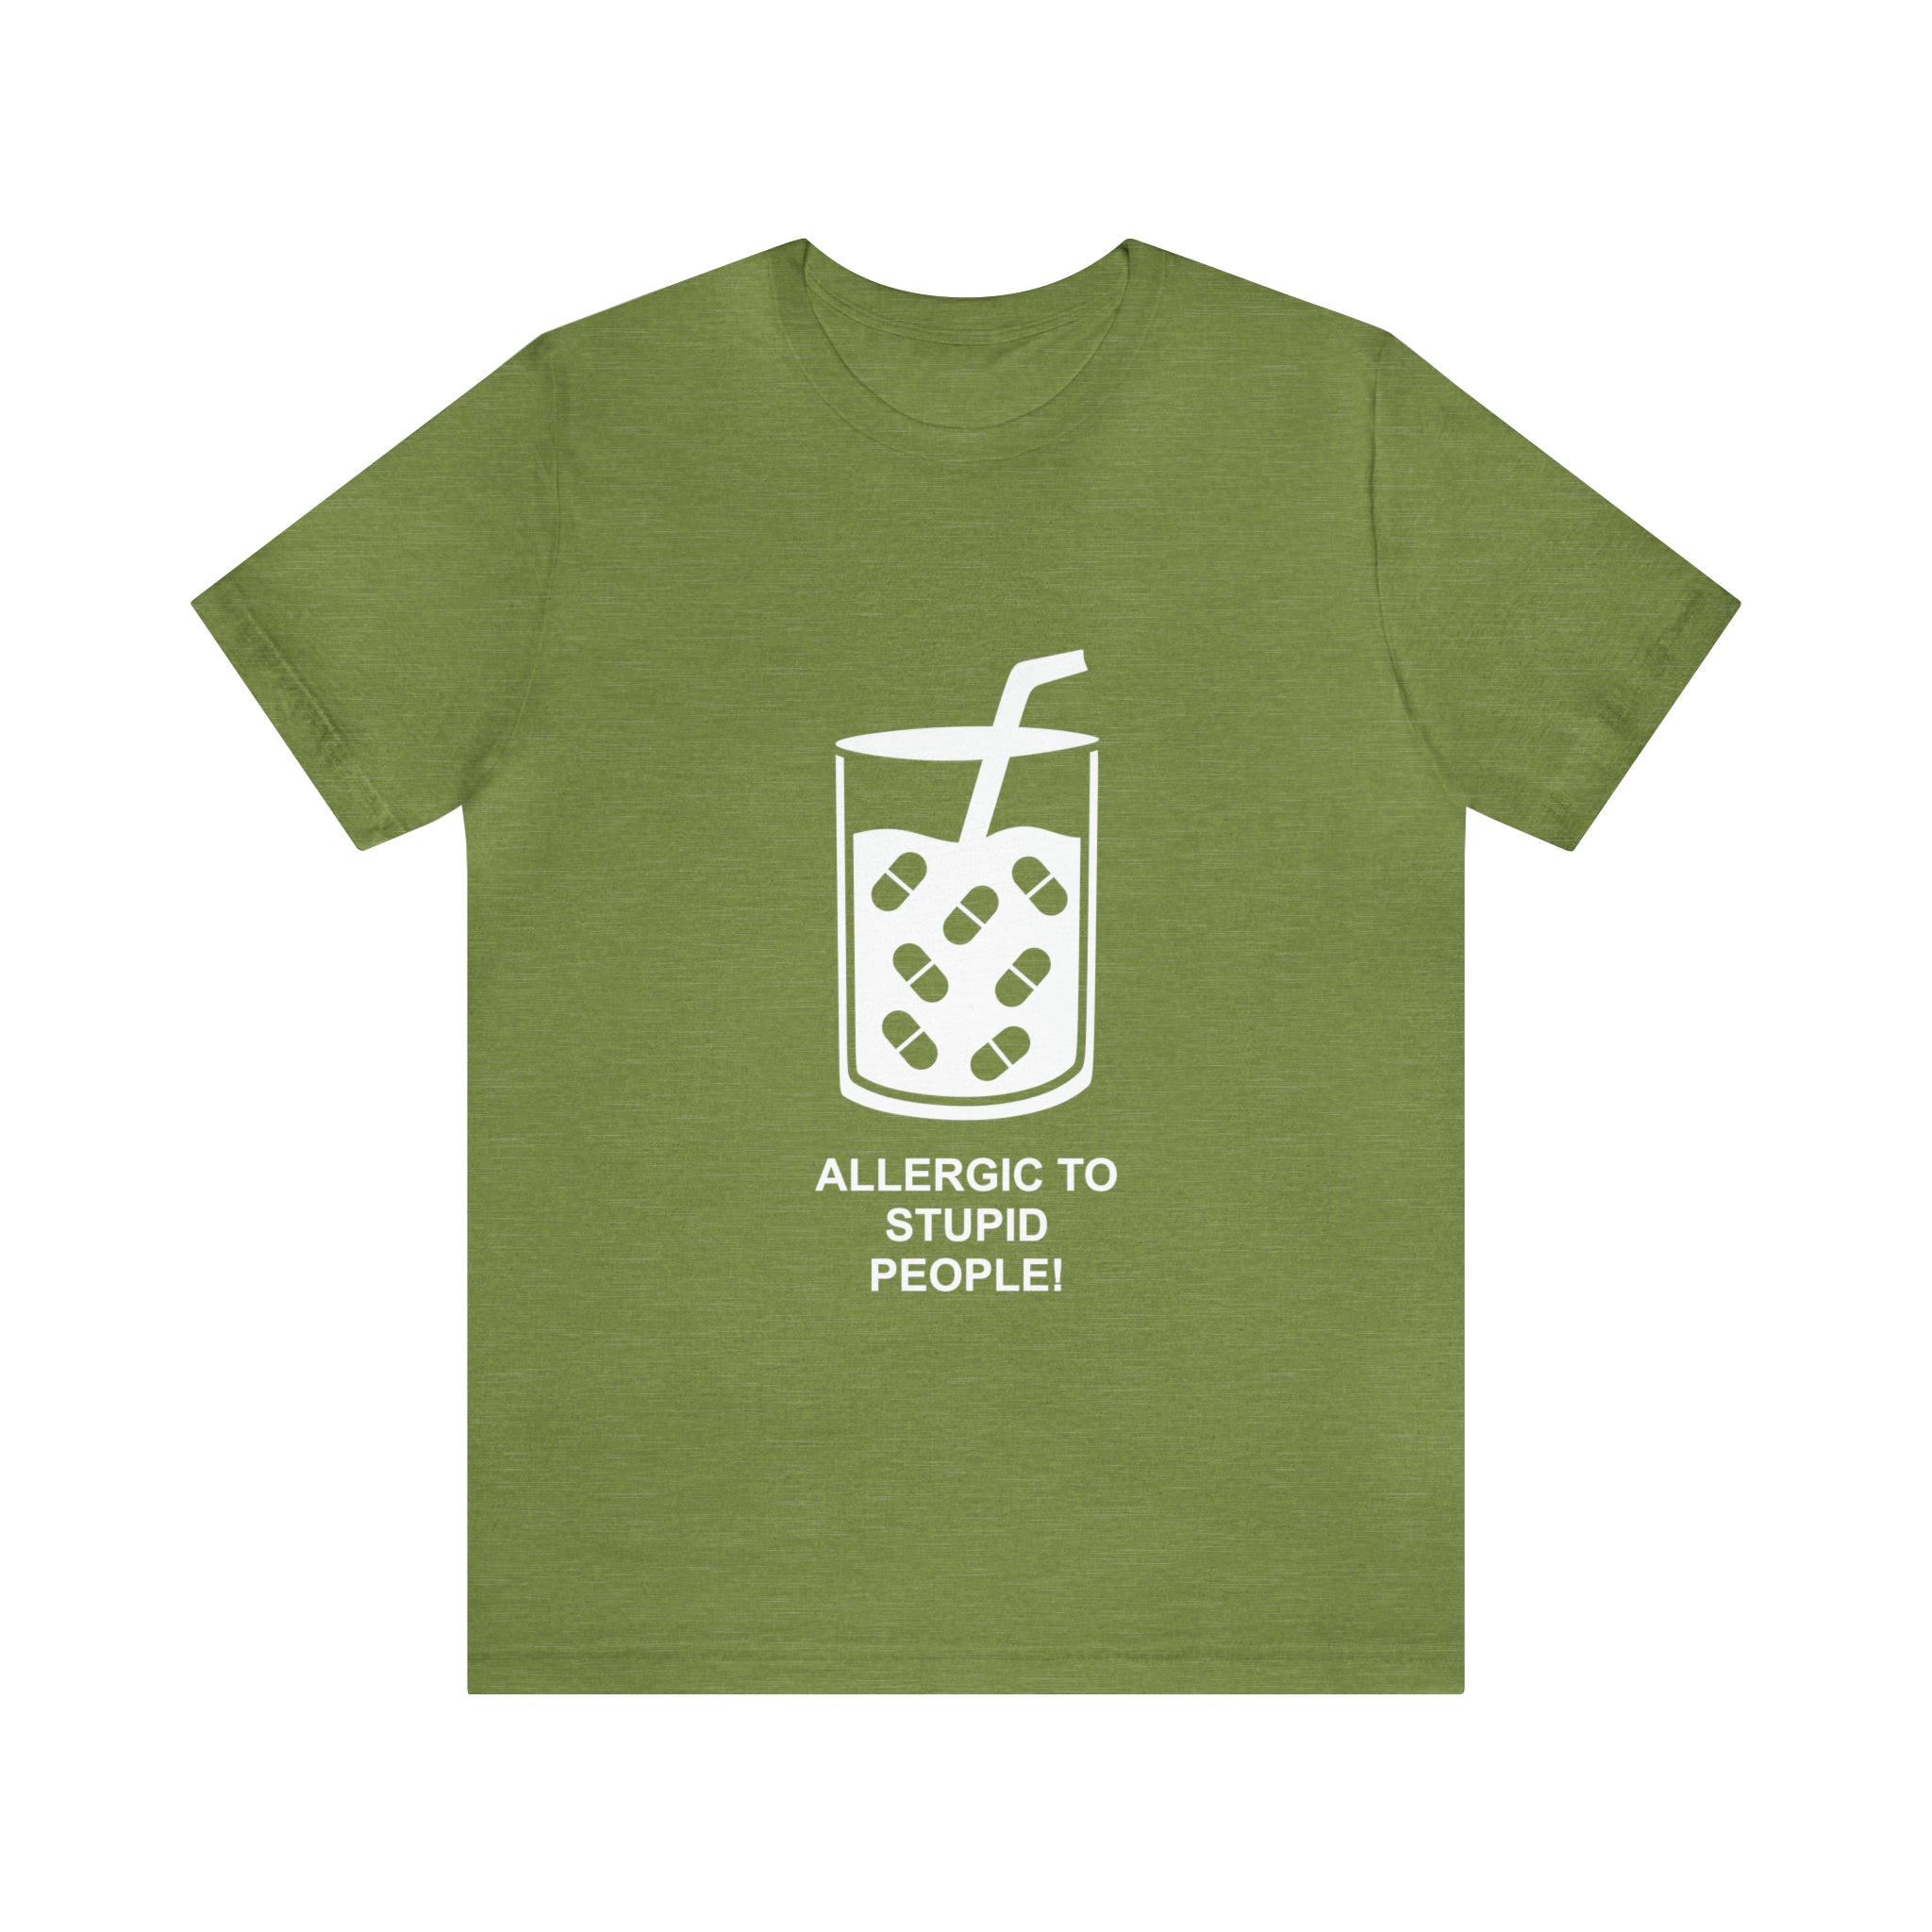 A green Allergic to Stupid People T-Shirt.